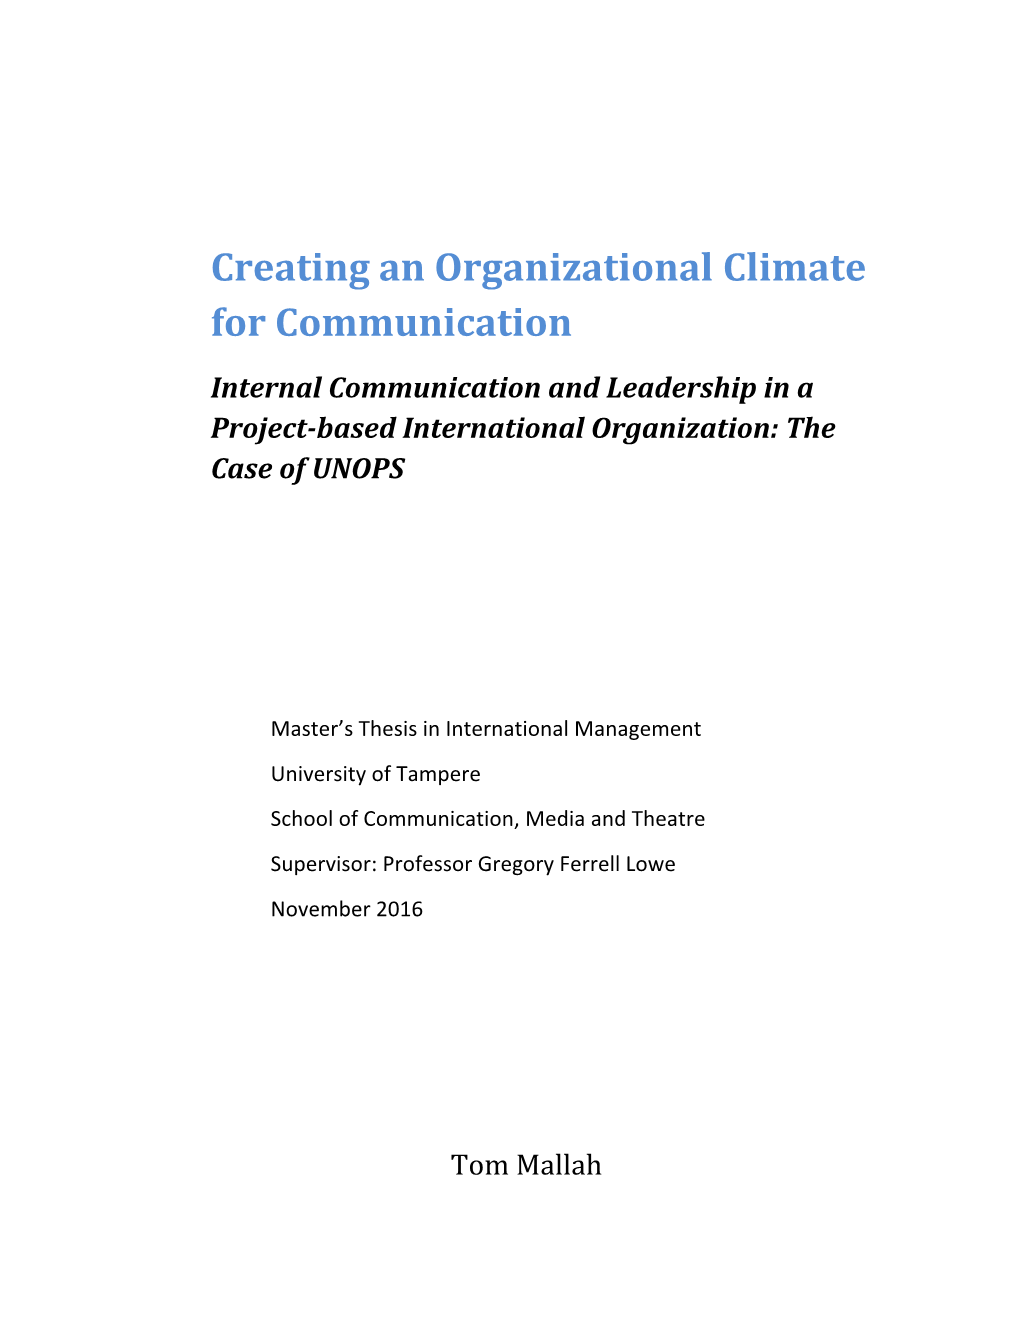 Creating an Organizational Climate for Communication Internal Communication and Leadership in a Project-Based International Organization: the Case of UNOPS